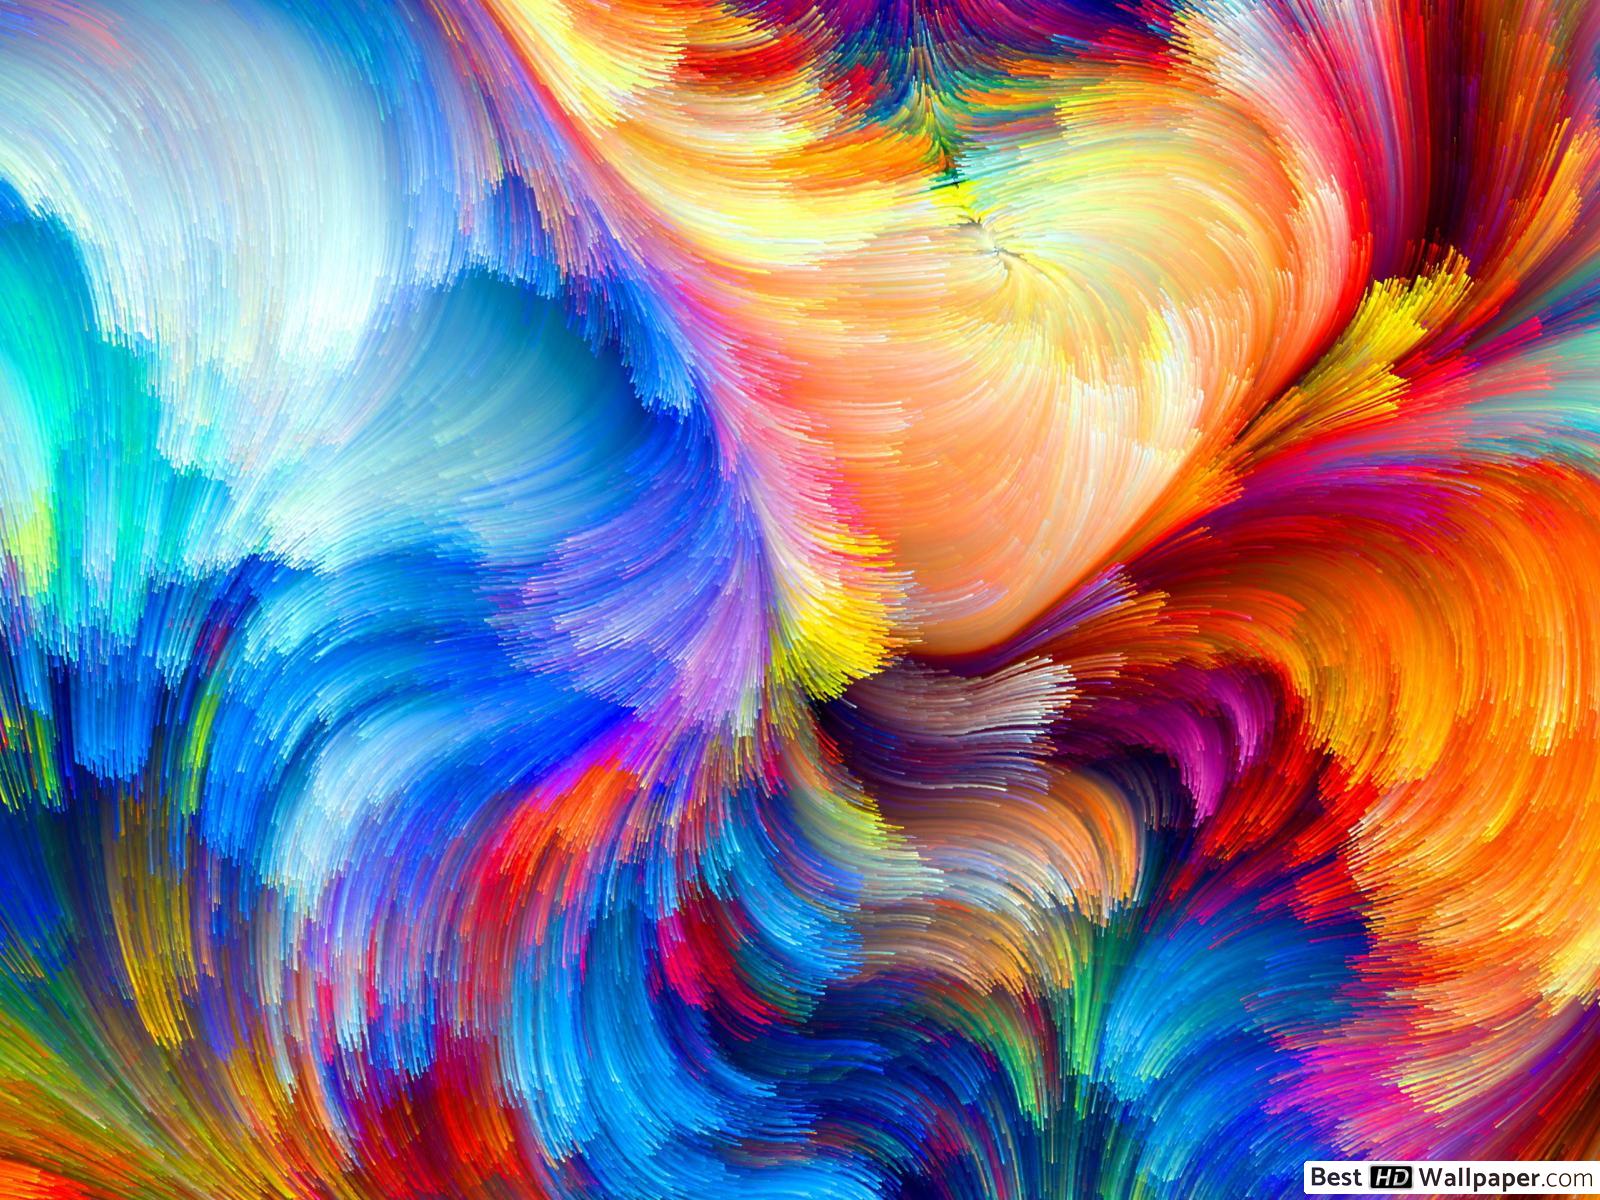 Colorful Abstract Brush strokes HD wallpaper download